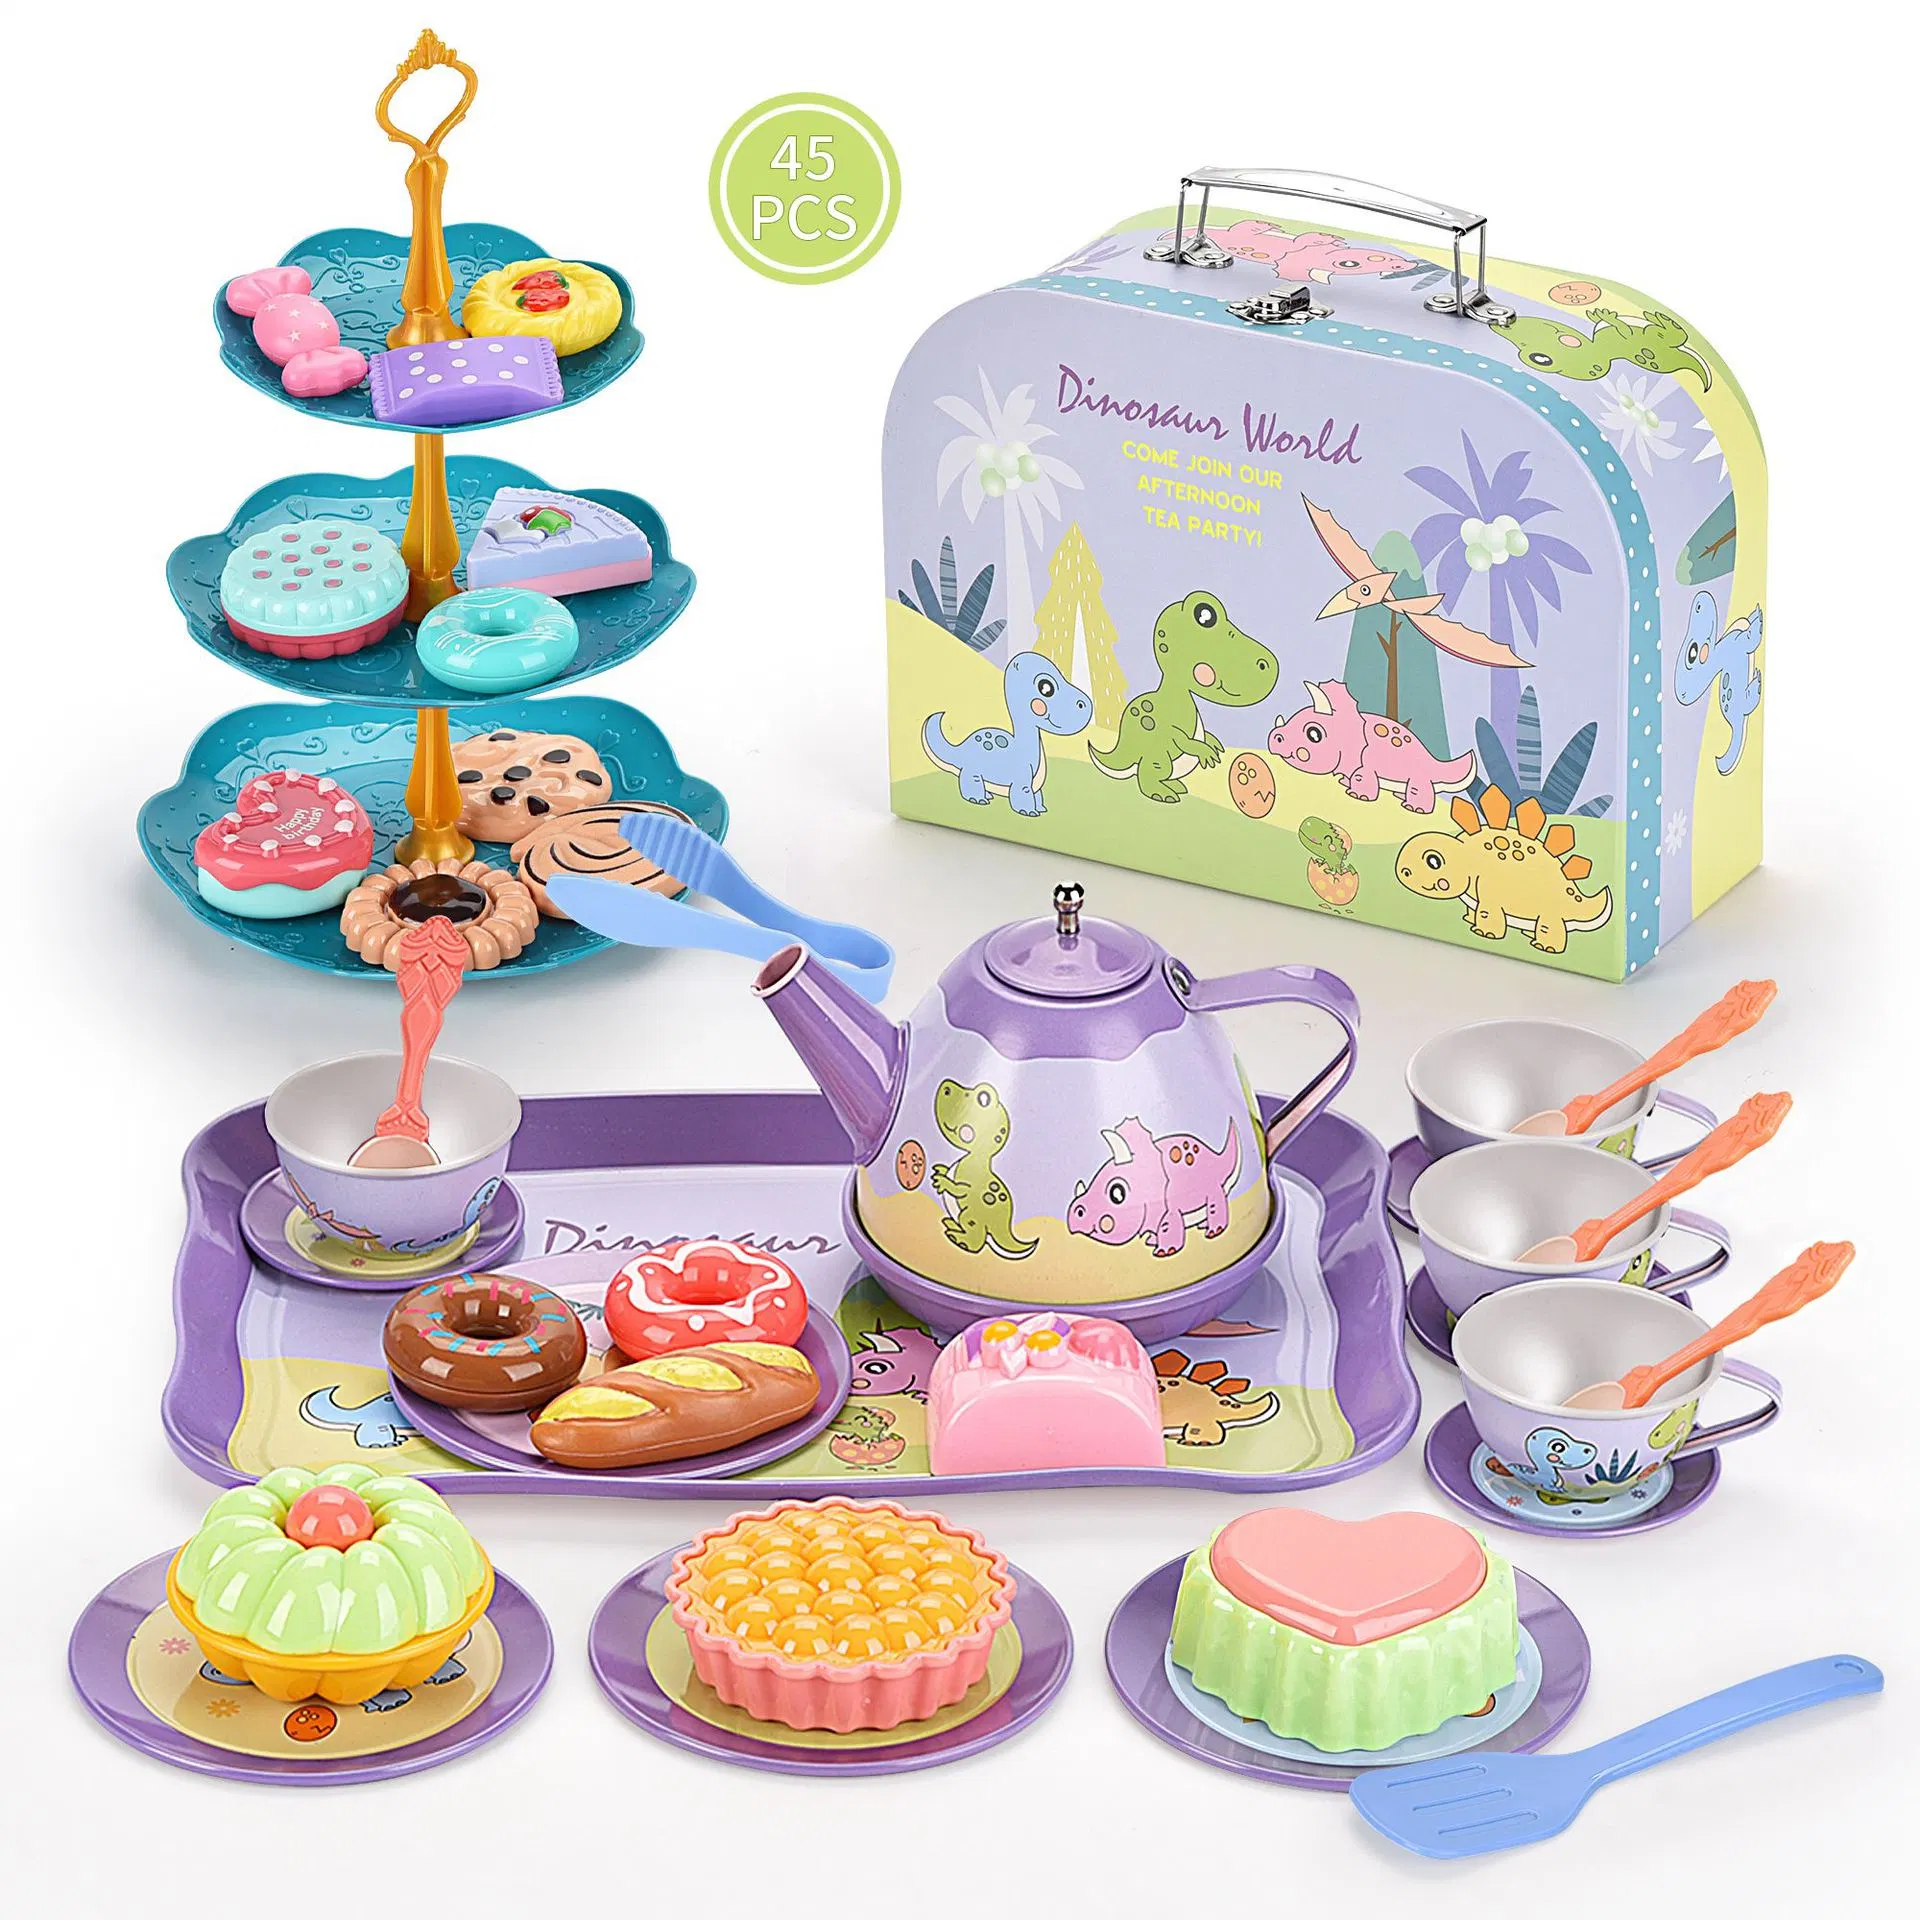 New Tea Party Set for Little Girls Boys Dinosaur Toys for Girls Elsa Princess 48 Pack Kids Kitchen Pretend Toy with Tin Tea Set Desserts & Carrying Case Gift